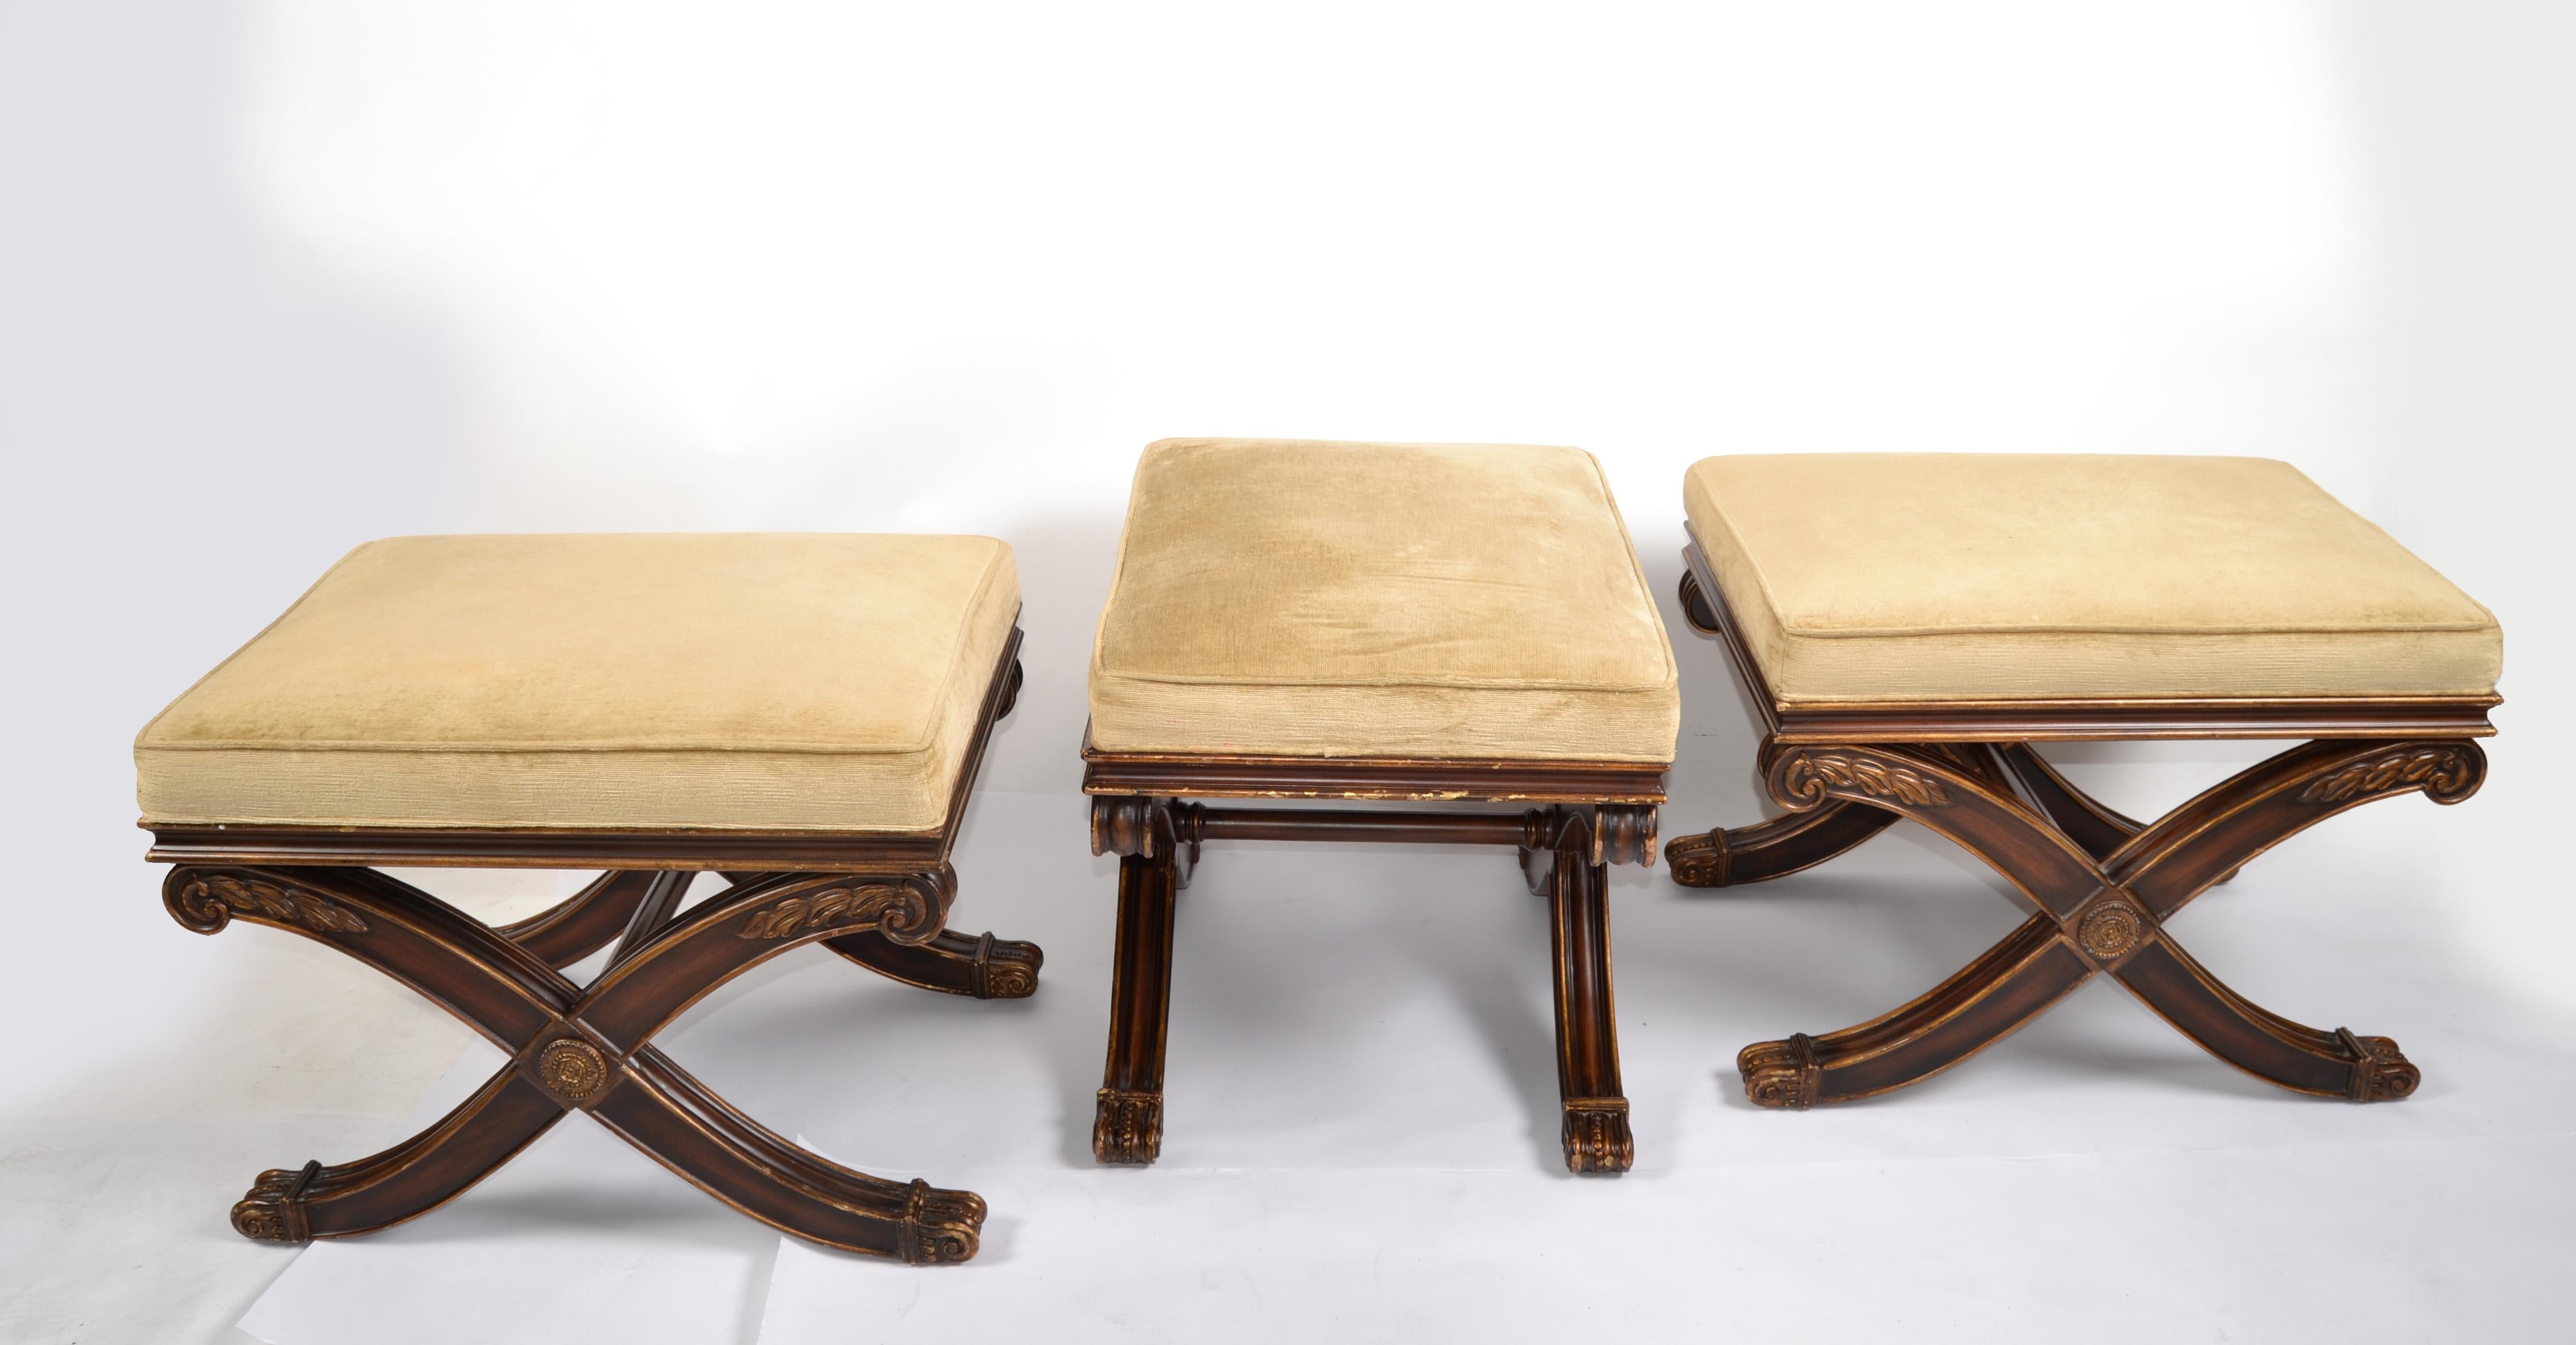 Three beautiful French Neoclassical Hollywood Regency style benches, stools or ottoman with an X-base.
The upholstered seats are in a mustard cord fabric and look great. The base has gilded highlights and carved wooden appliques. This set of 3